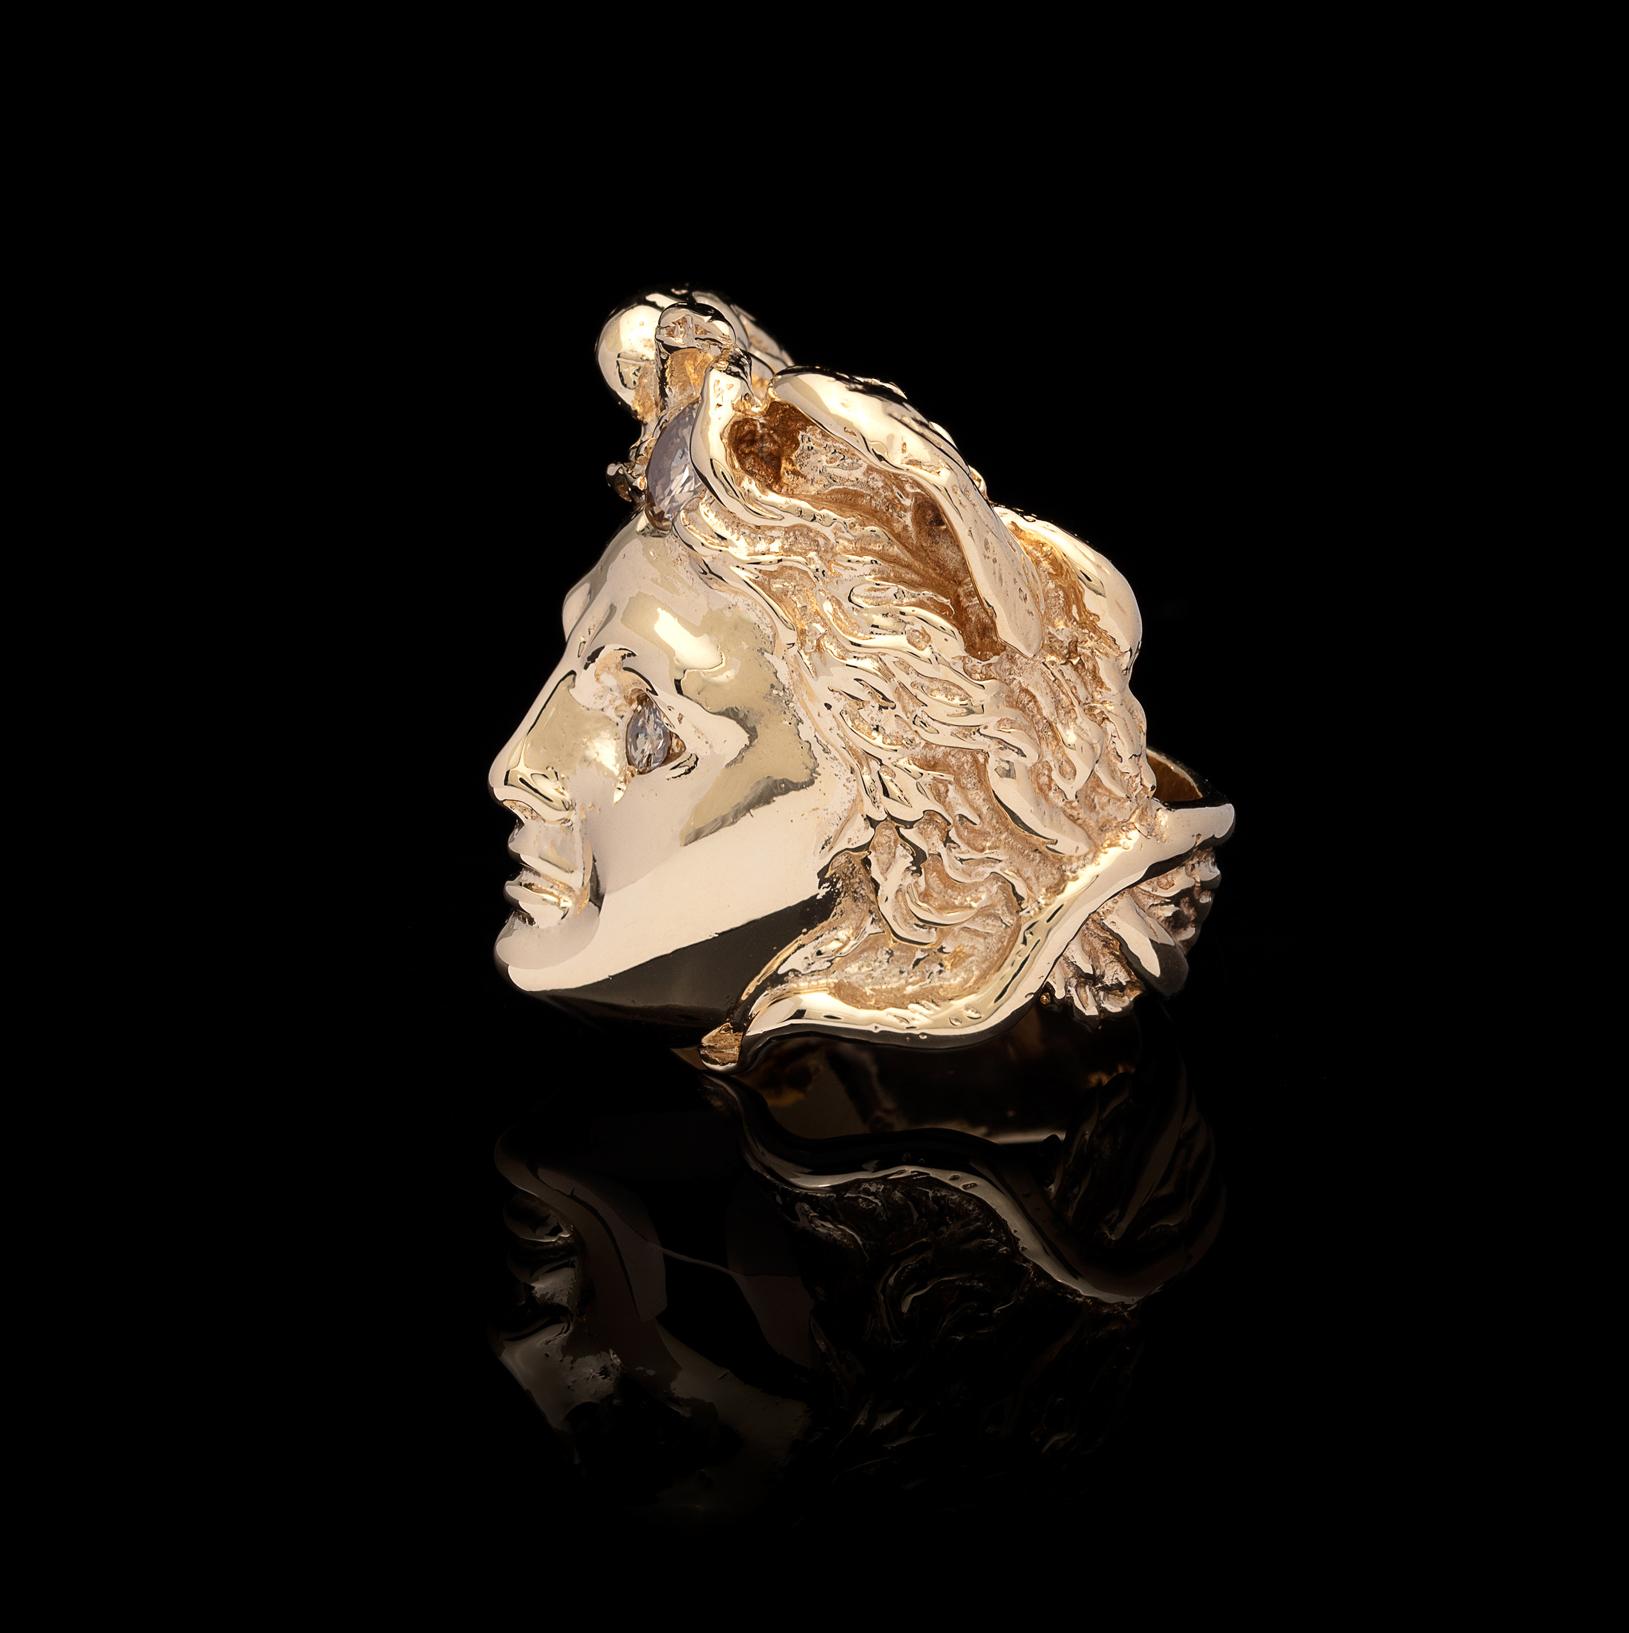 Mythical figure comes to life! This 14k gold Medusa ring is set with round brilliant-cut diamond eyes and one more in her hair of snakes. The ring weighs 33.50 grams, and is currently a size 7 3/4, with easy adjustment up or down. Greek mythology in